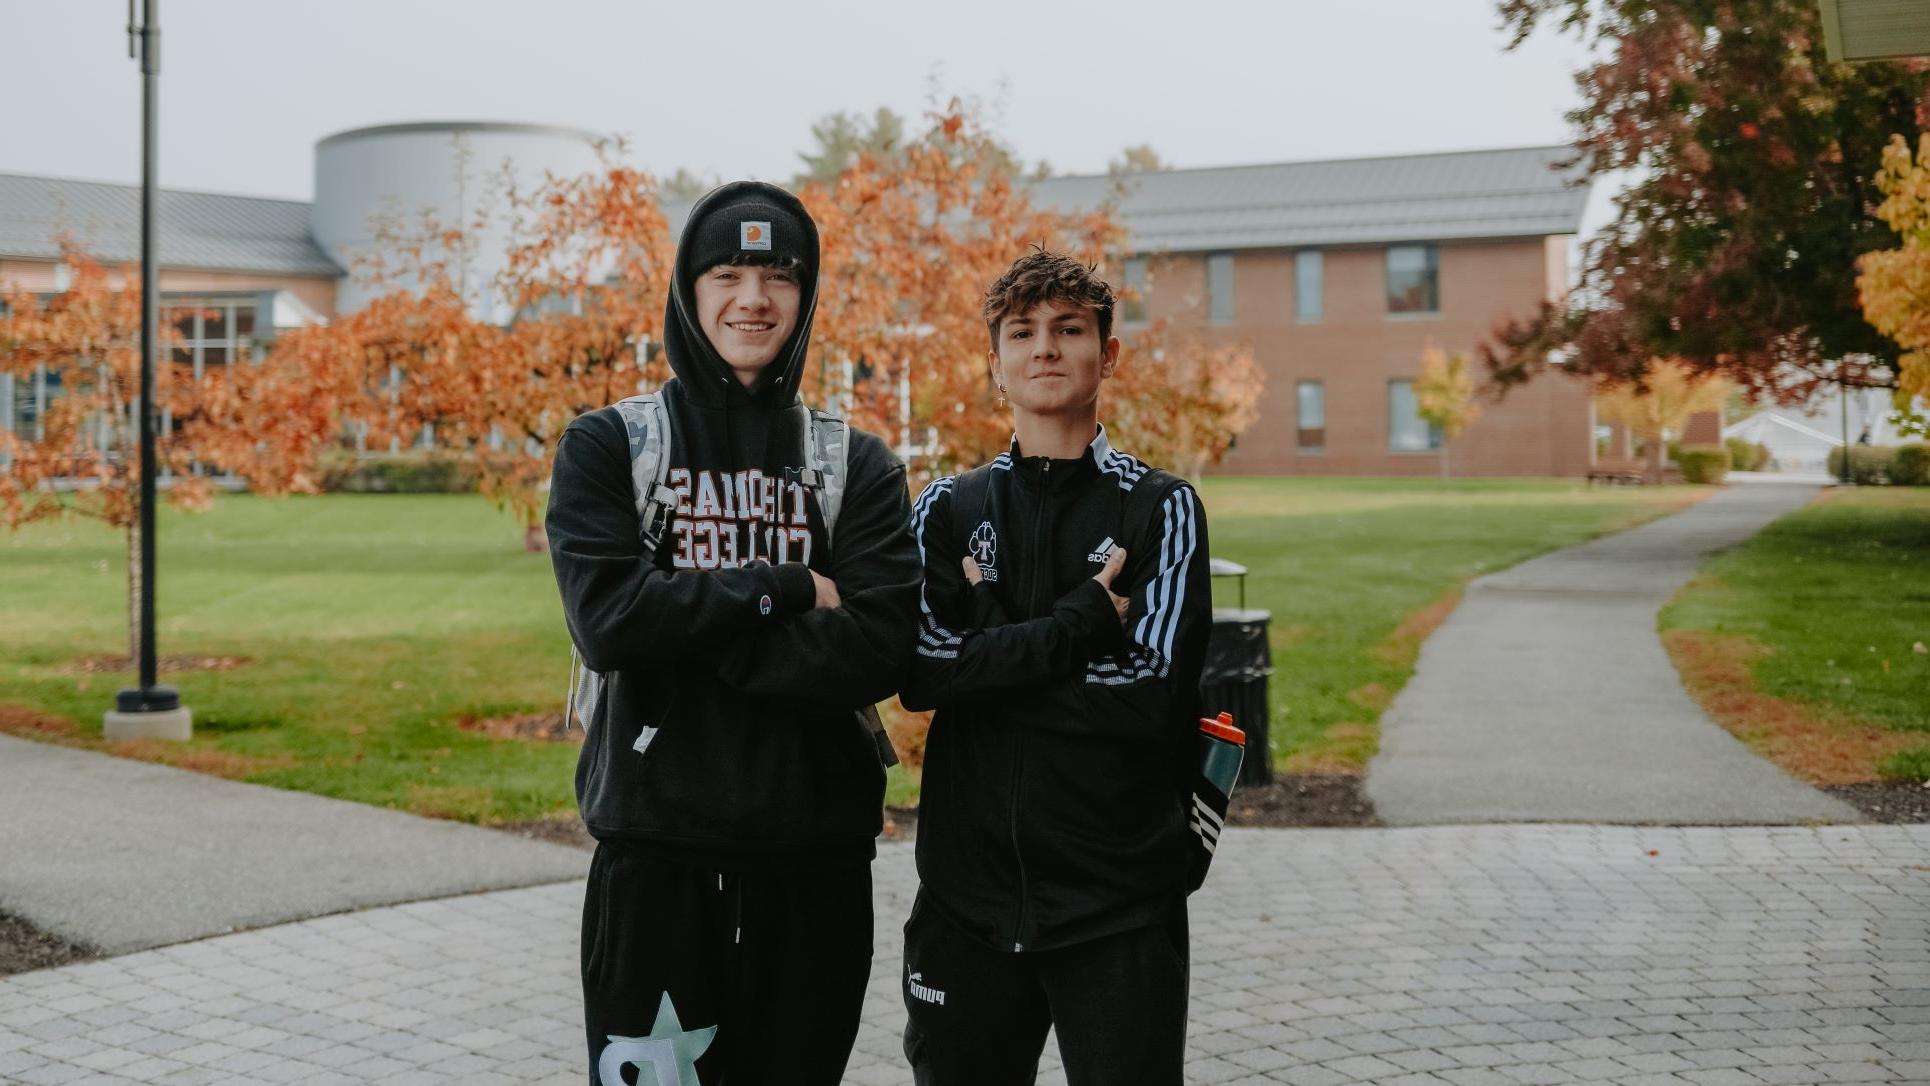 Two international students wearing Thomas College swag posed together with crossed arms on campus